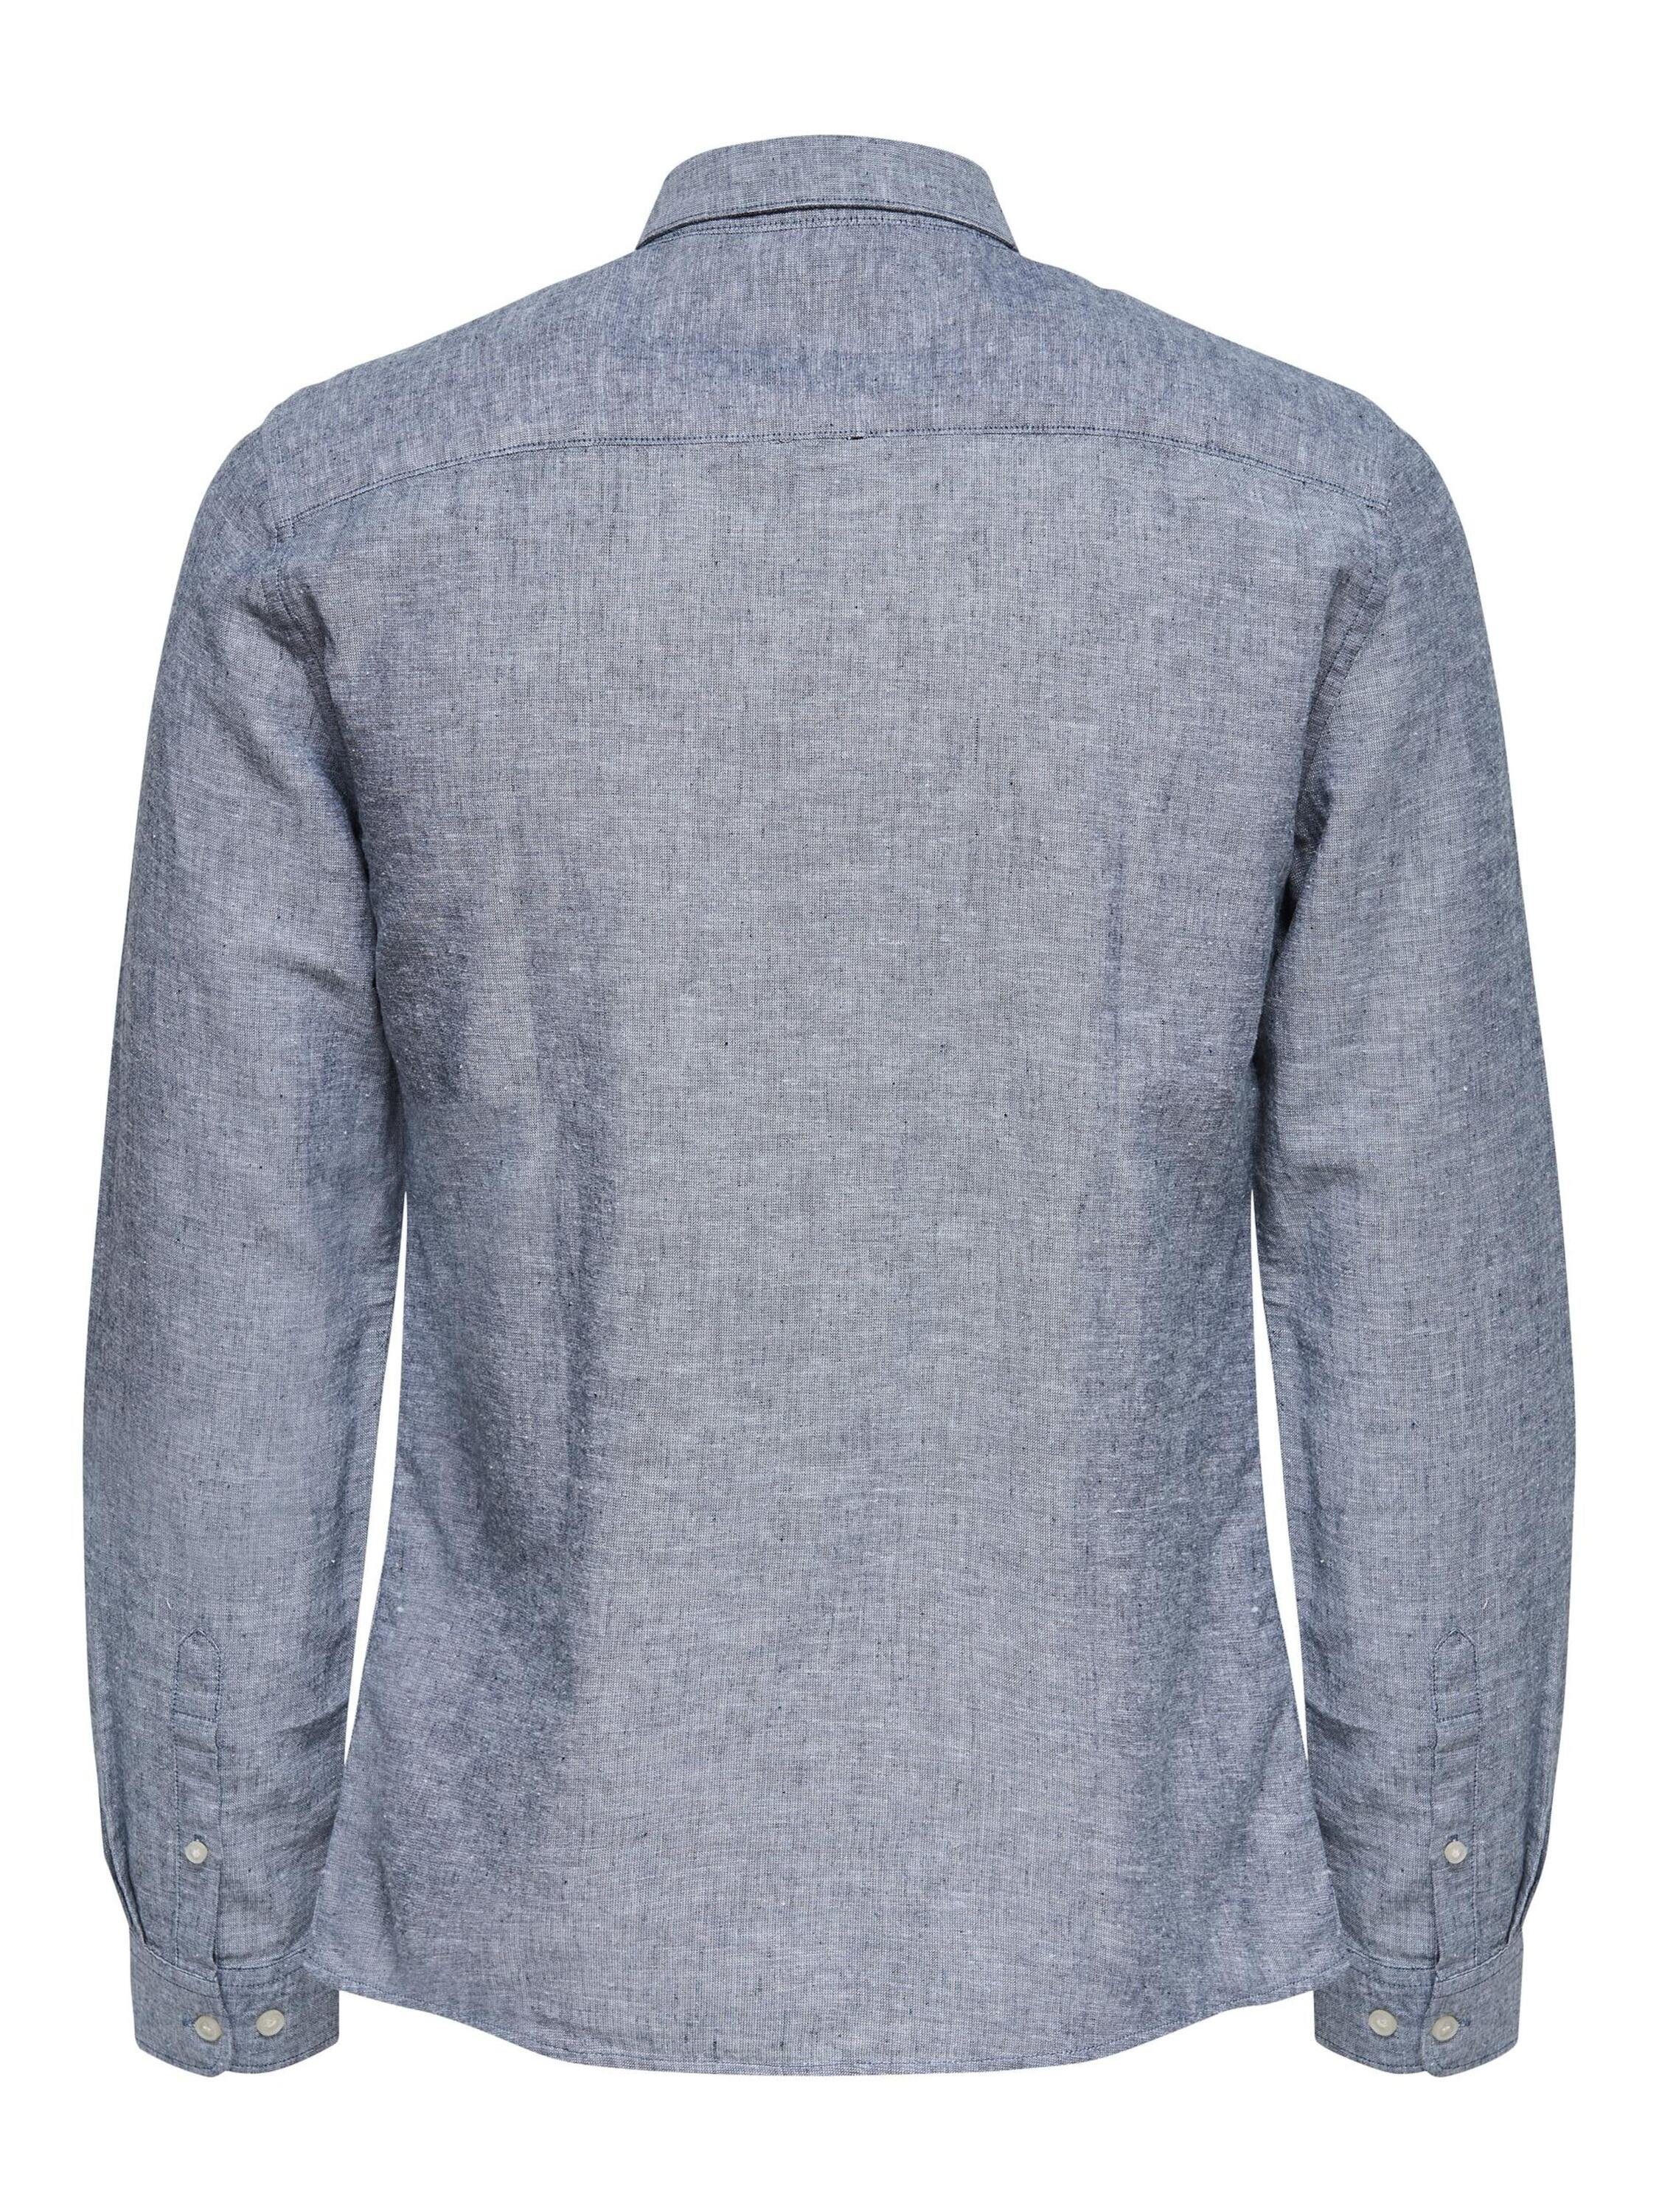 ONLY & SONS Langarmhemd Caiden (1-tlg)